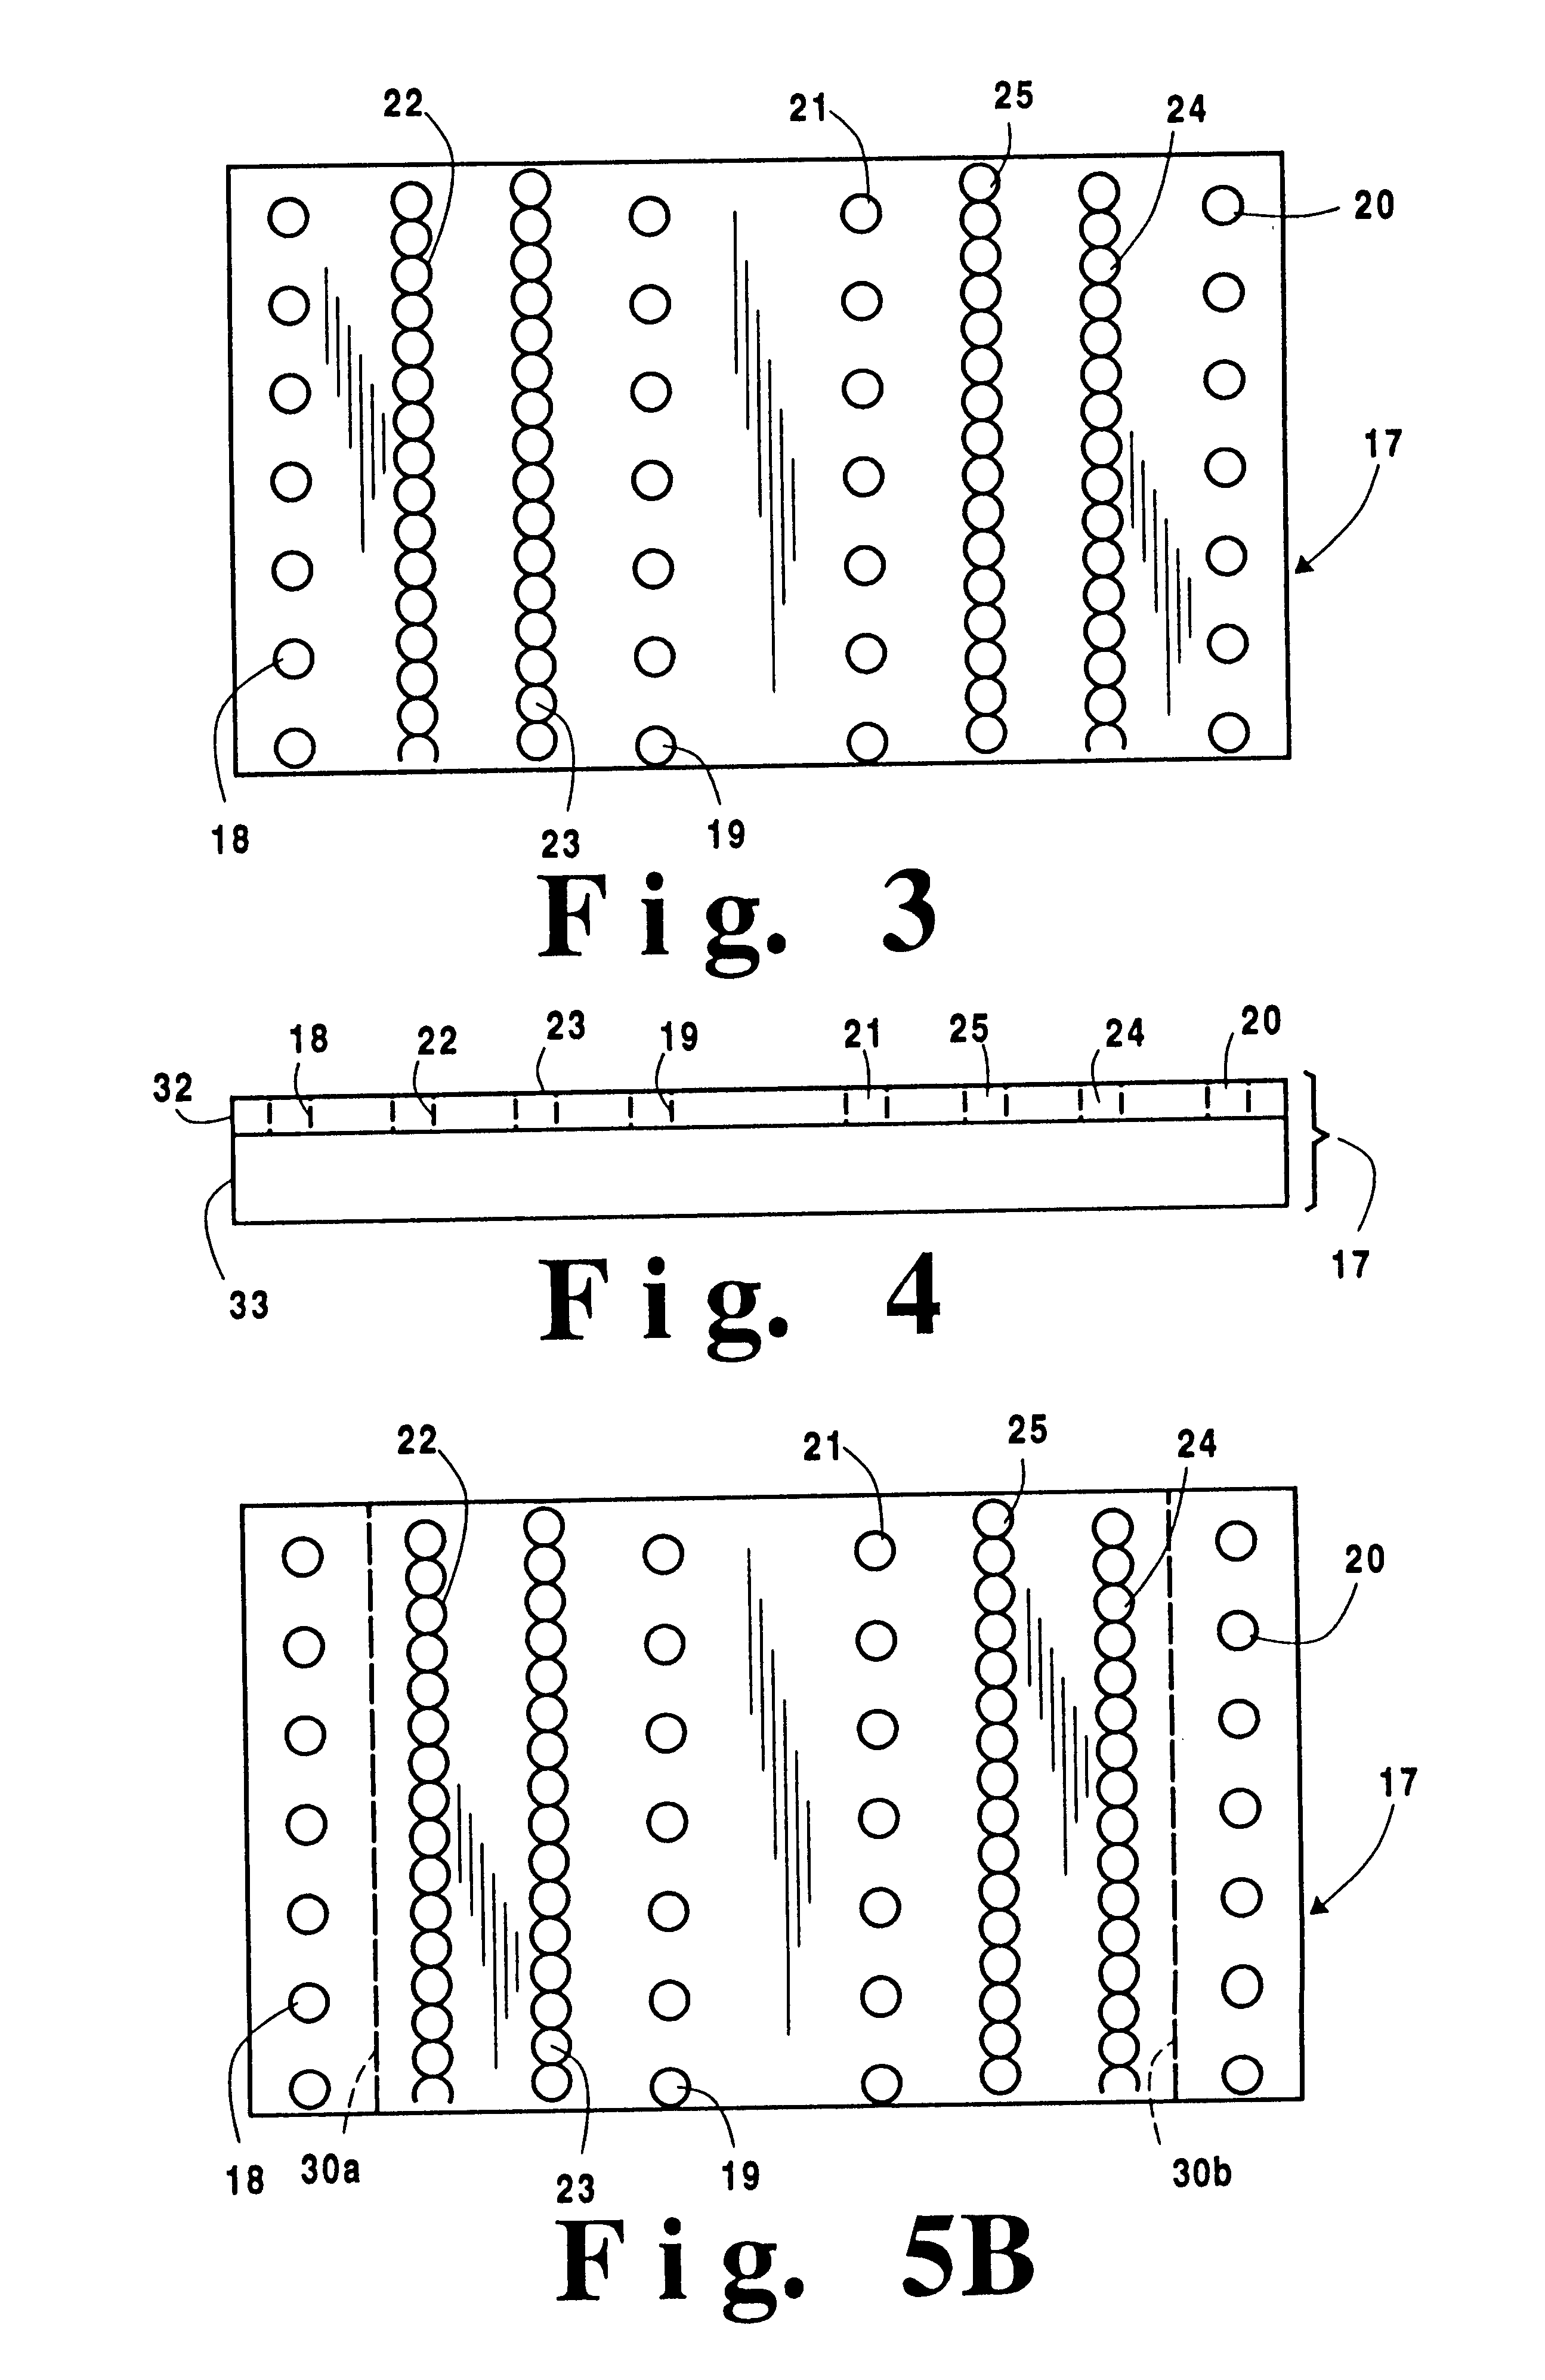 Formation of punch inspection masks and other devices using a laser